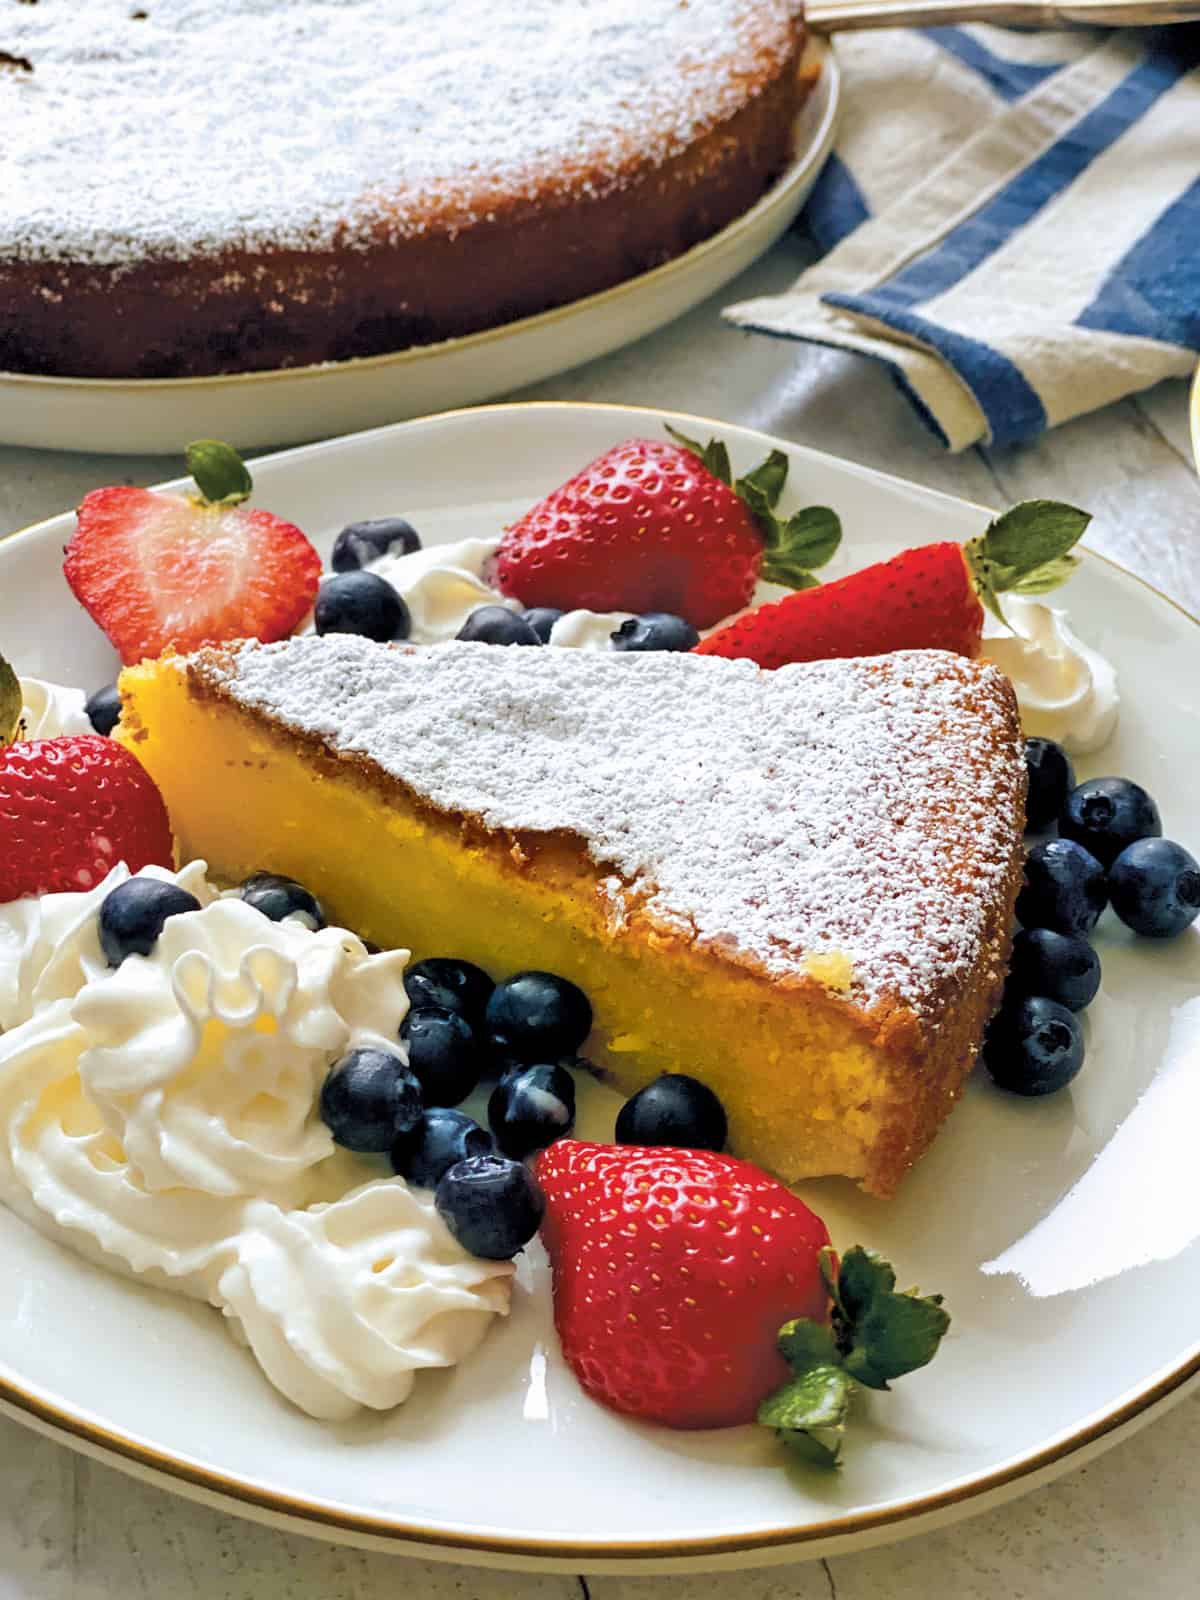 A piece of Meyer lemon olive oil cake with whipped cream and berries on a plate, at the back a cake on a plater.